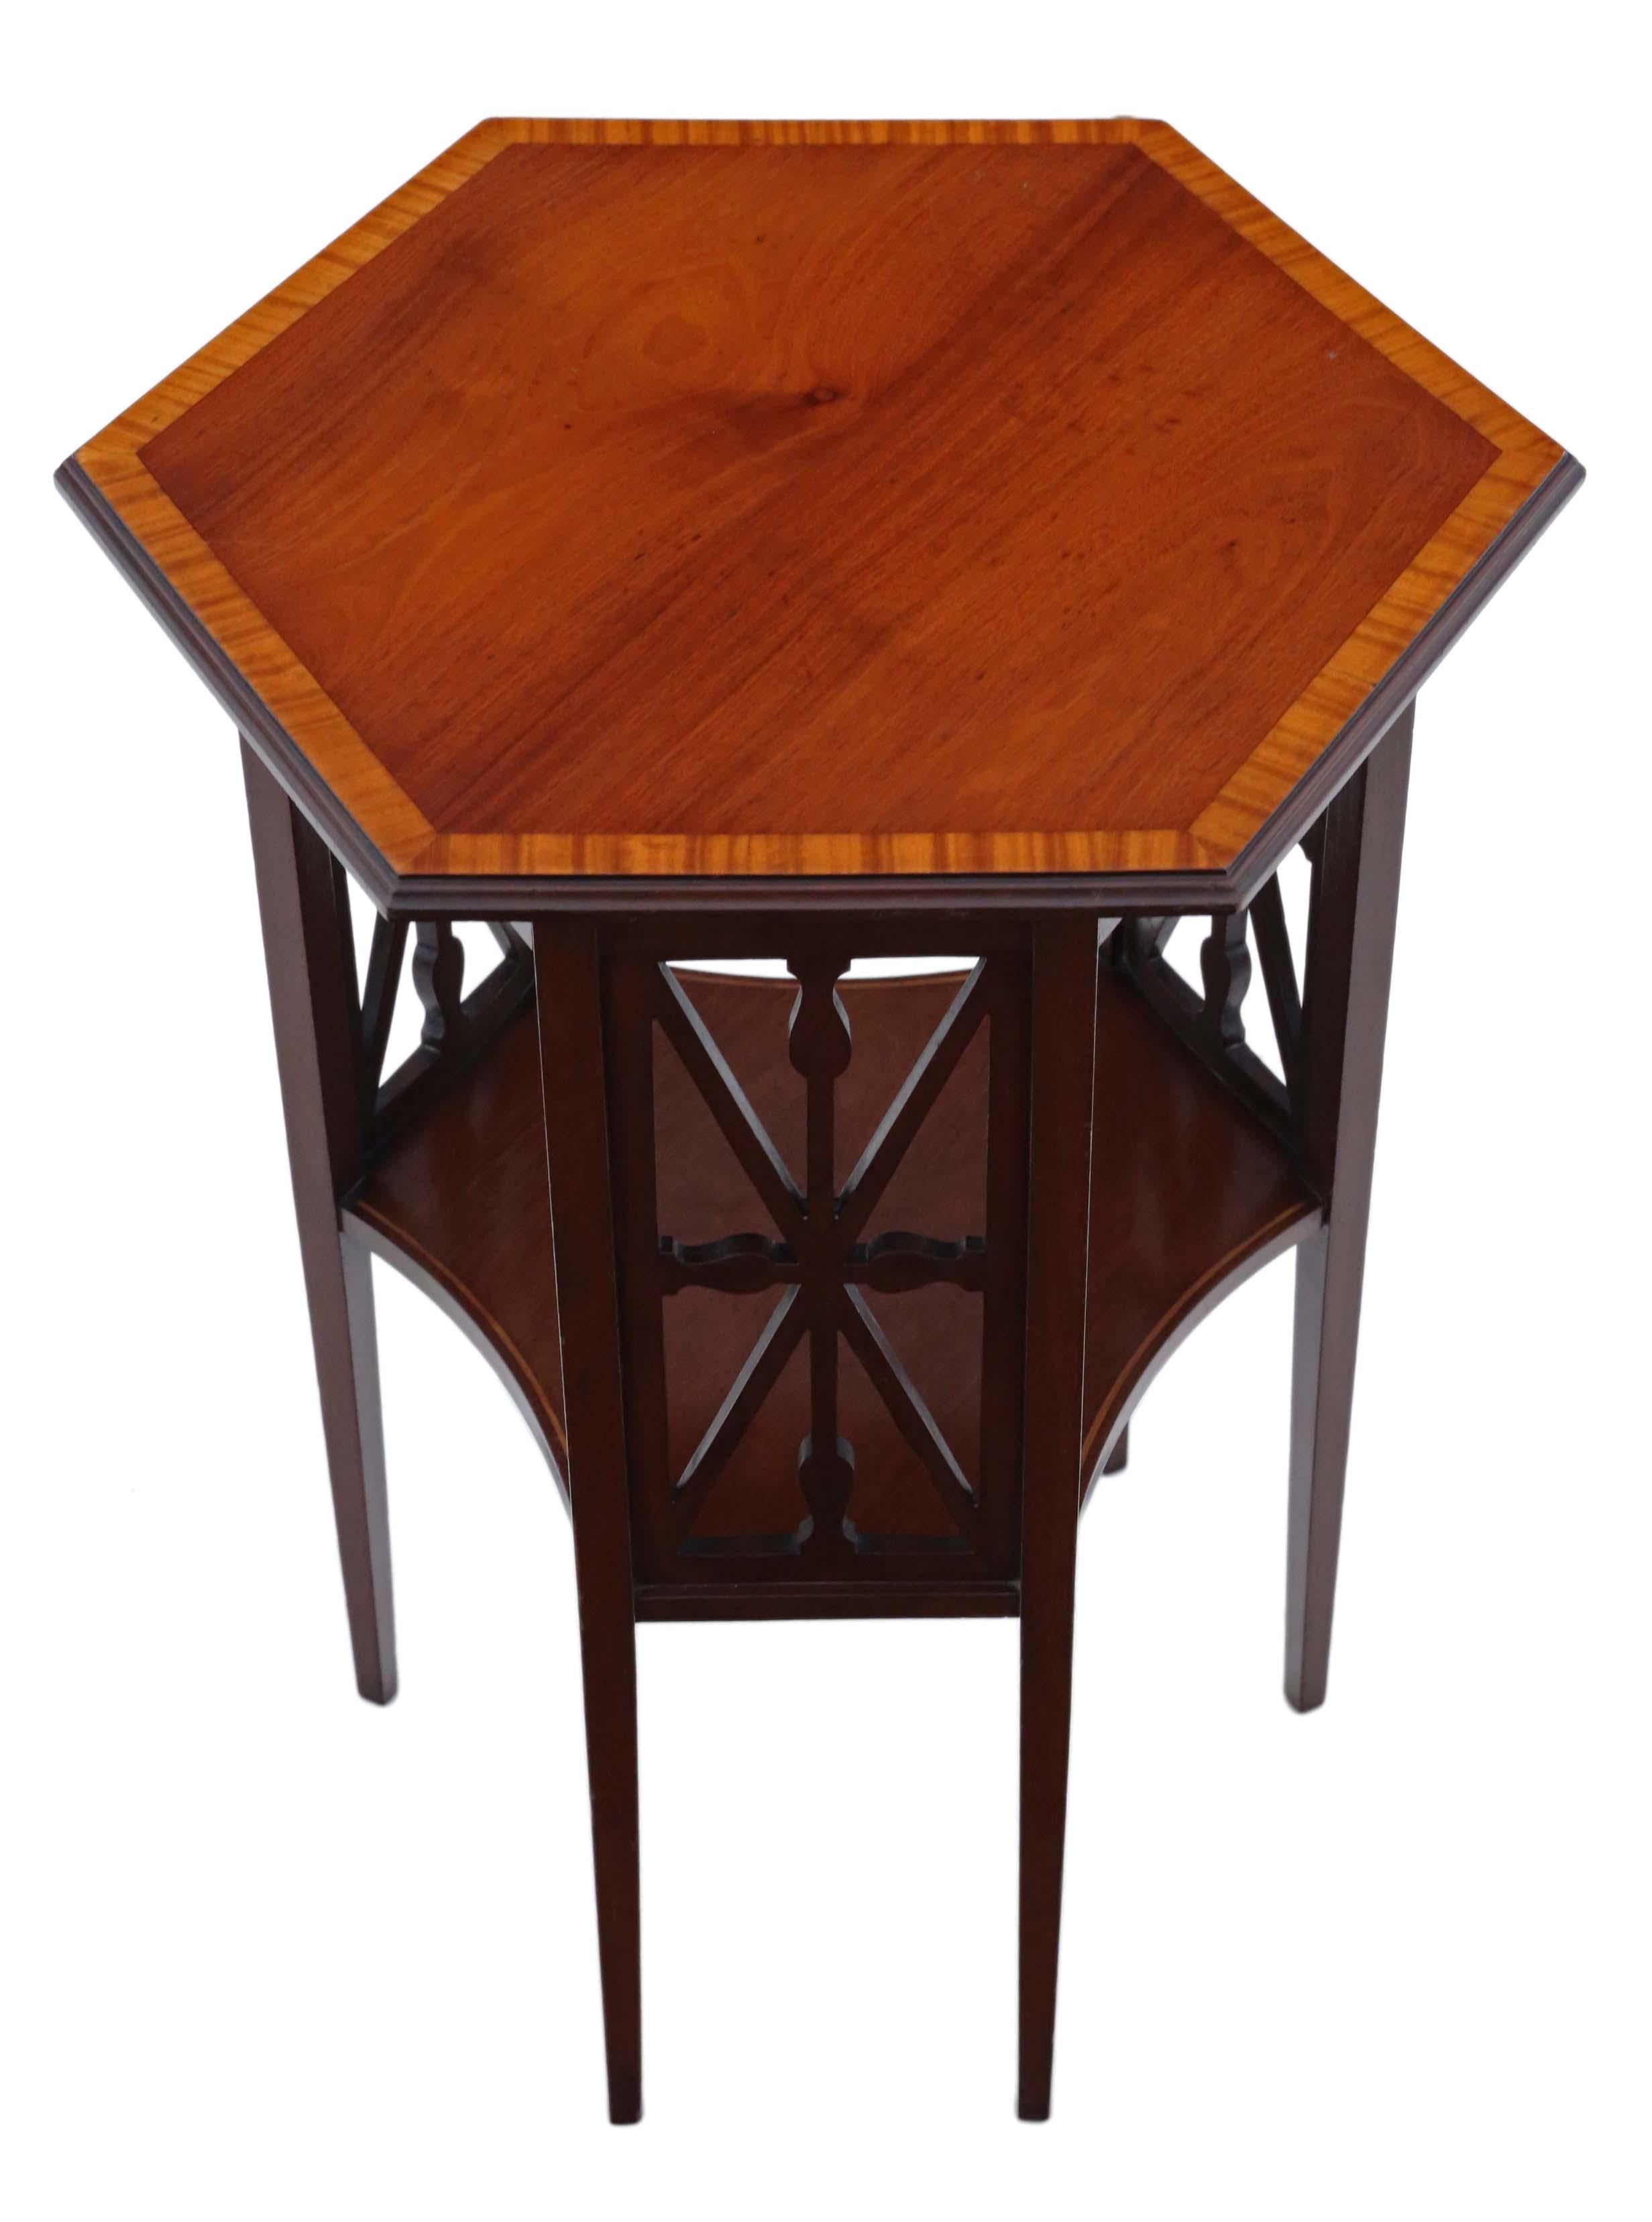 Antique fine quality Edwardian C1905 inlaid mahogany table occasional side centre window.

No loose joints and no woodworm. A rare decorative find, with lovely fret cut side decoration and inlaid crossbanding.

Would look great in the right